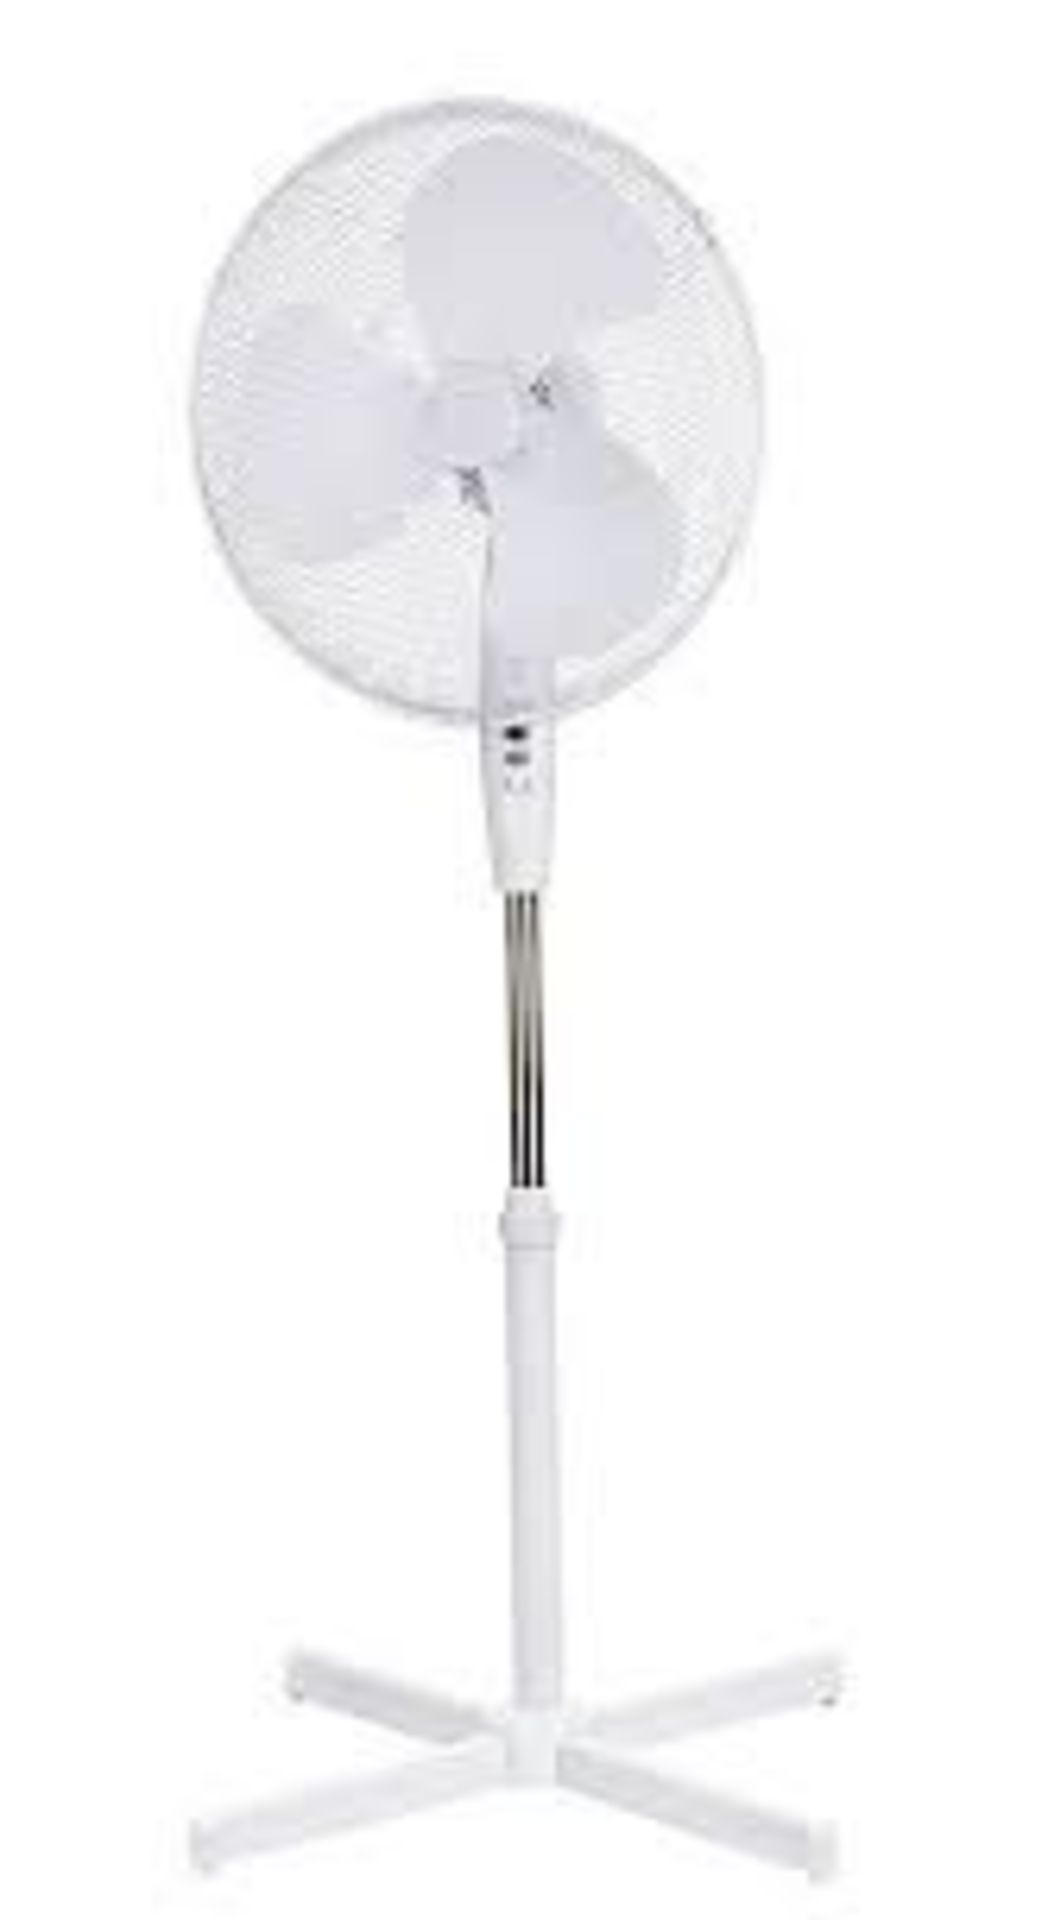 White 16" 40W Pedestal fan. - ER40. Keep your home cool with the help of this pedestal fan from